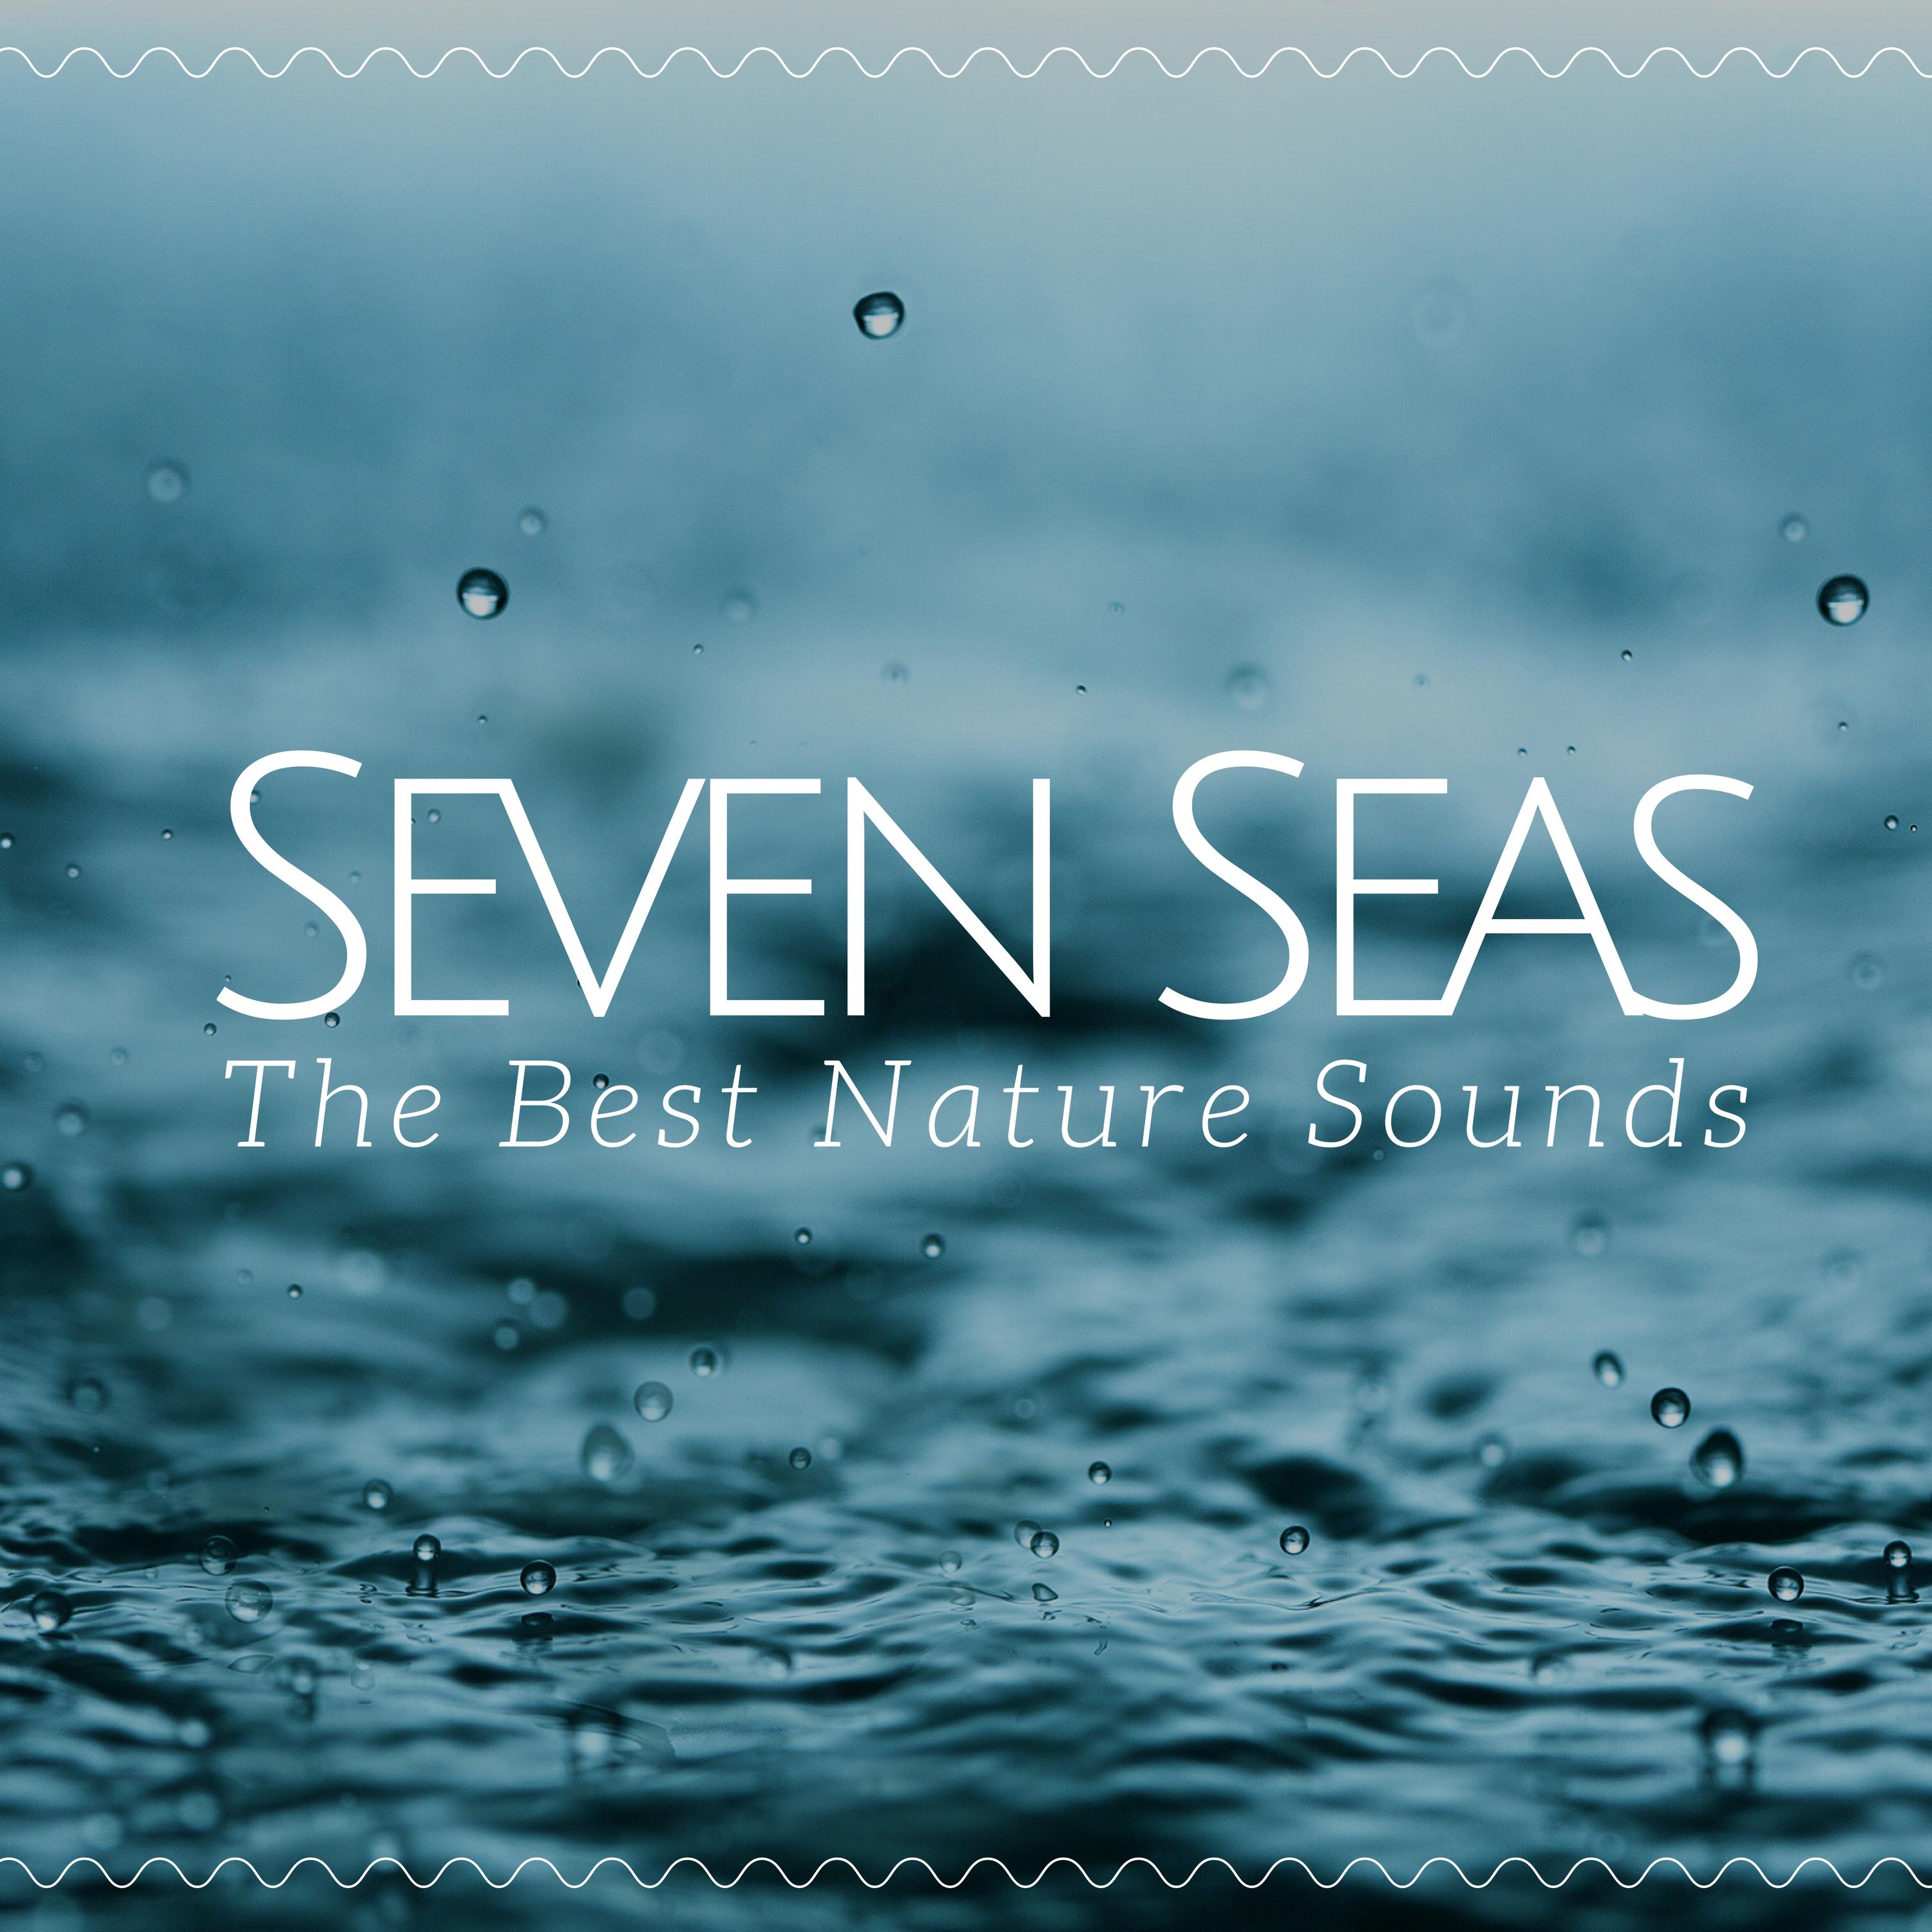 Seven Seas: The Best Nature Sounds for Liquid Relaxation, Meditation, Yoga, Soothe Your Stress, Self Hypnosis, Seaside Meditation